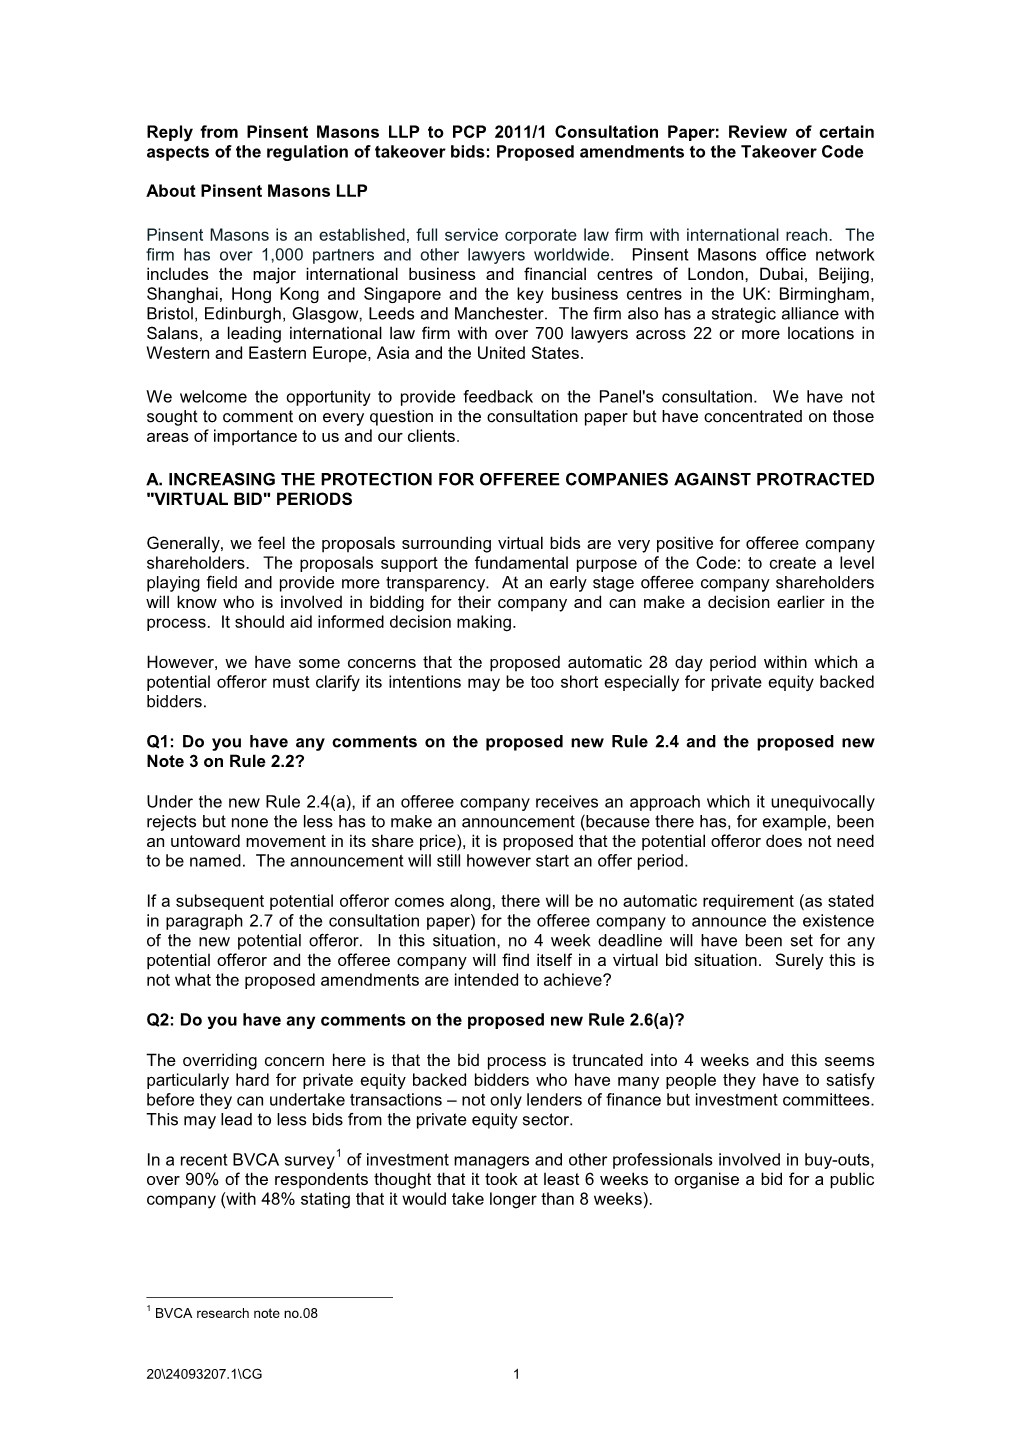 Reply from Pinsent Masons LLP to PCP 2011/1 Consultation Paper